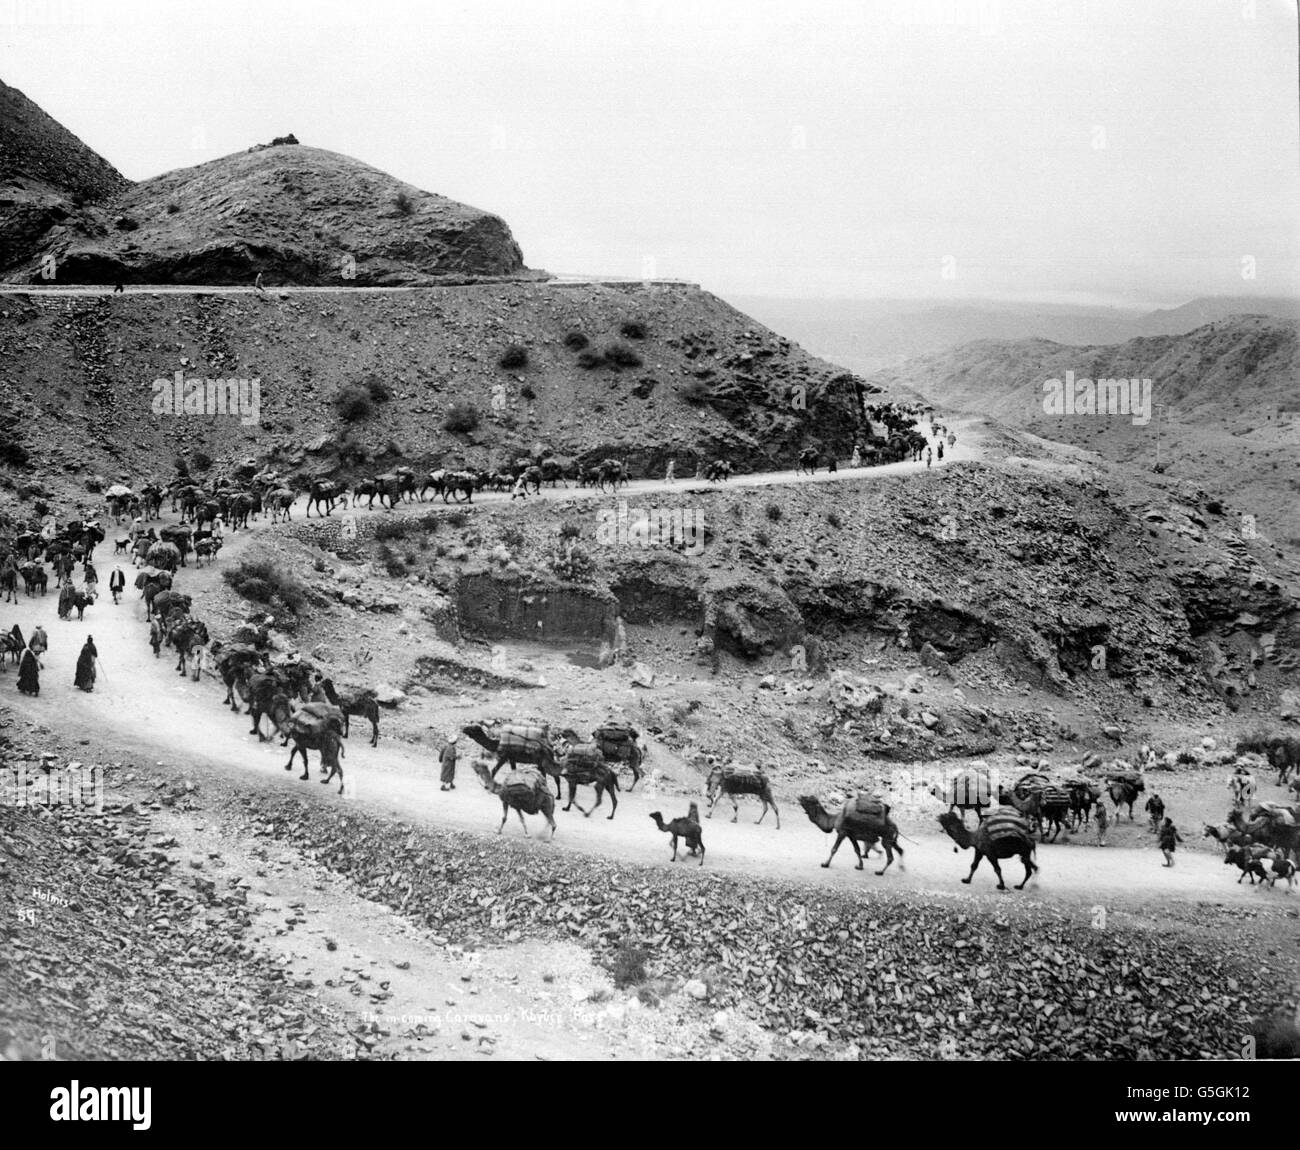 THE KHYBER PASS 1930: A camel train passes through the Khyber Pass on the frontier between Afghanistan and British India. Stock Photo